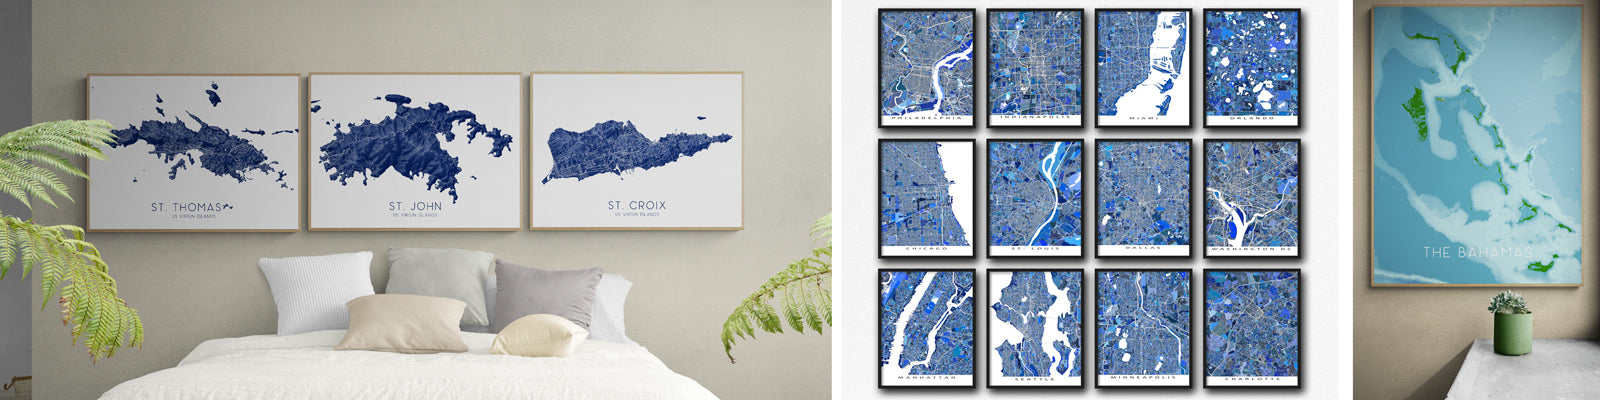 Assorted map art prints by Maps As Art.